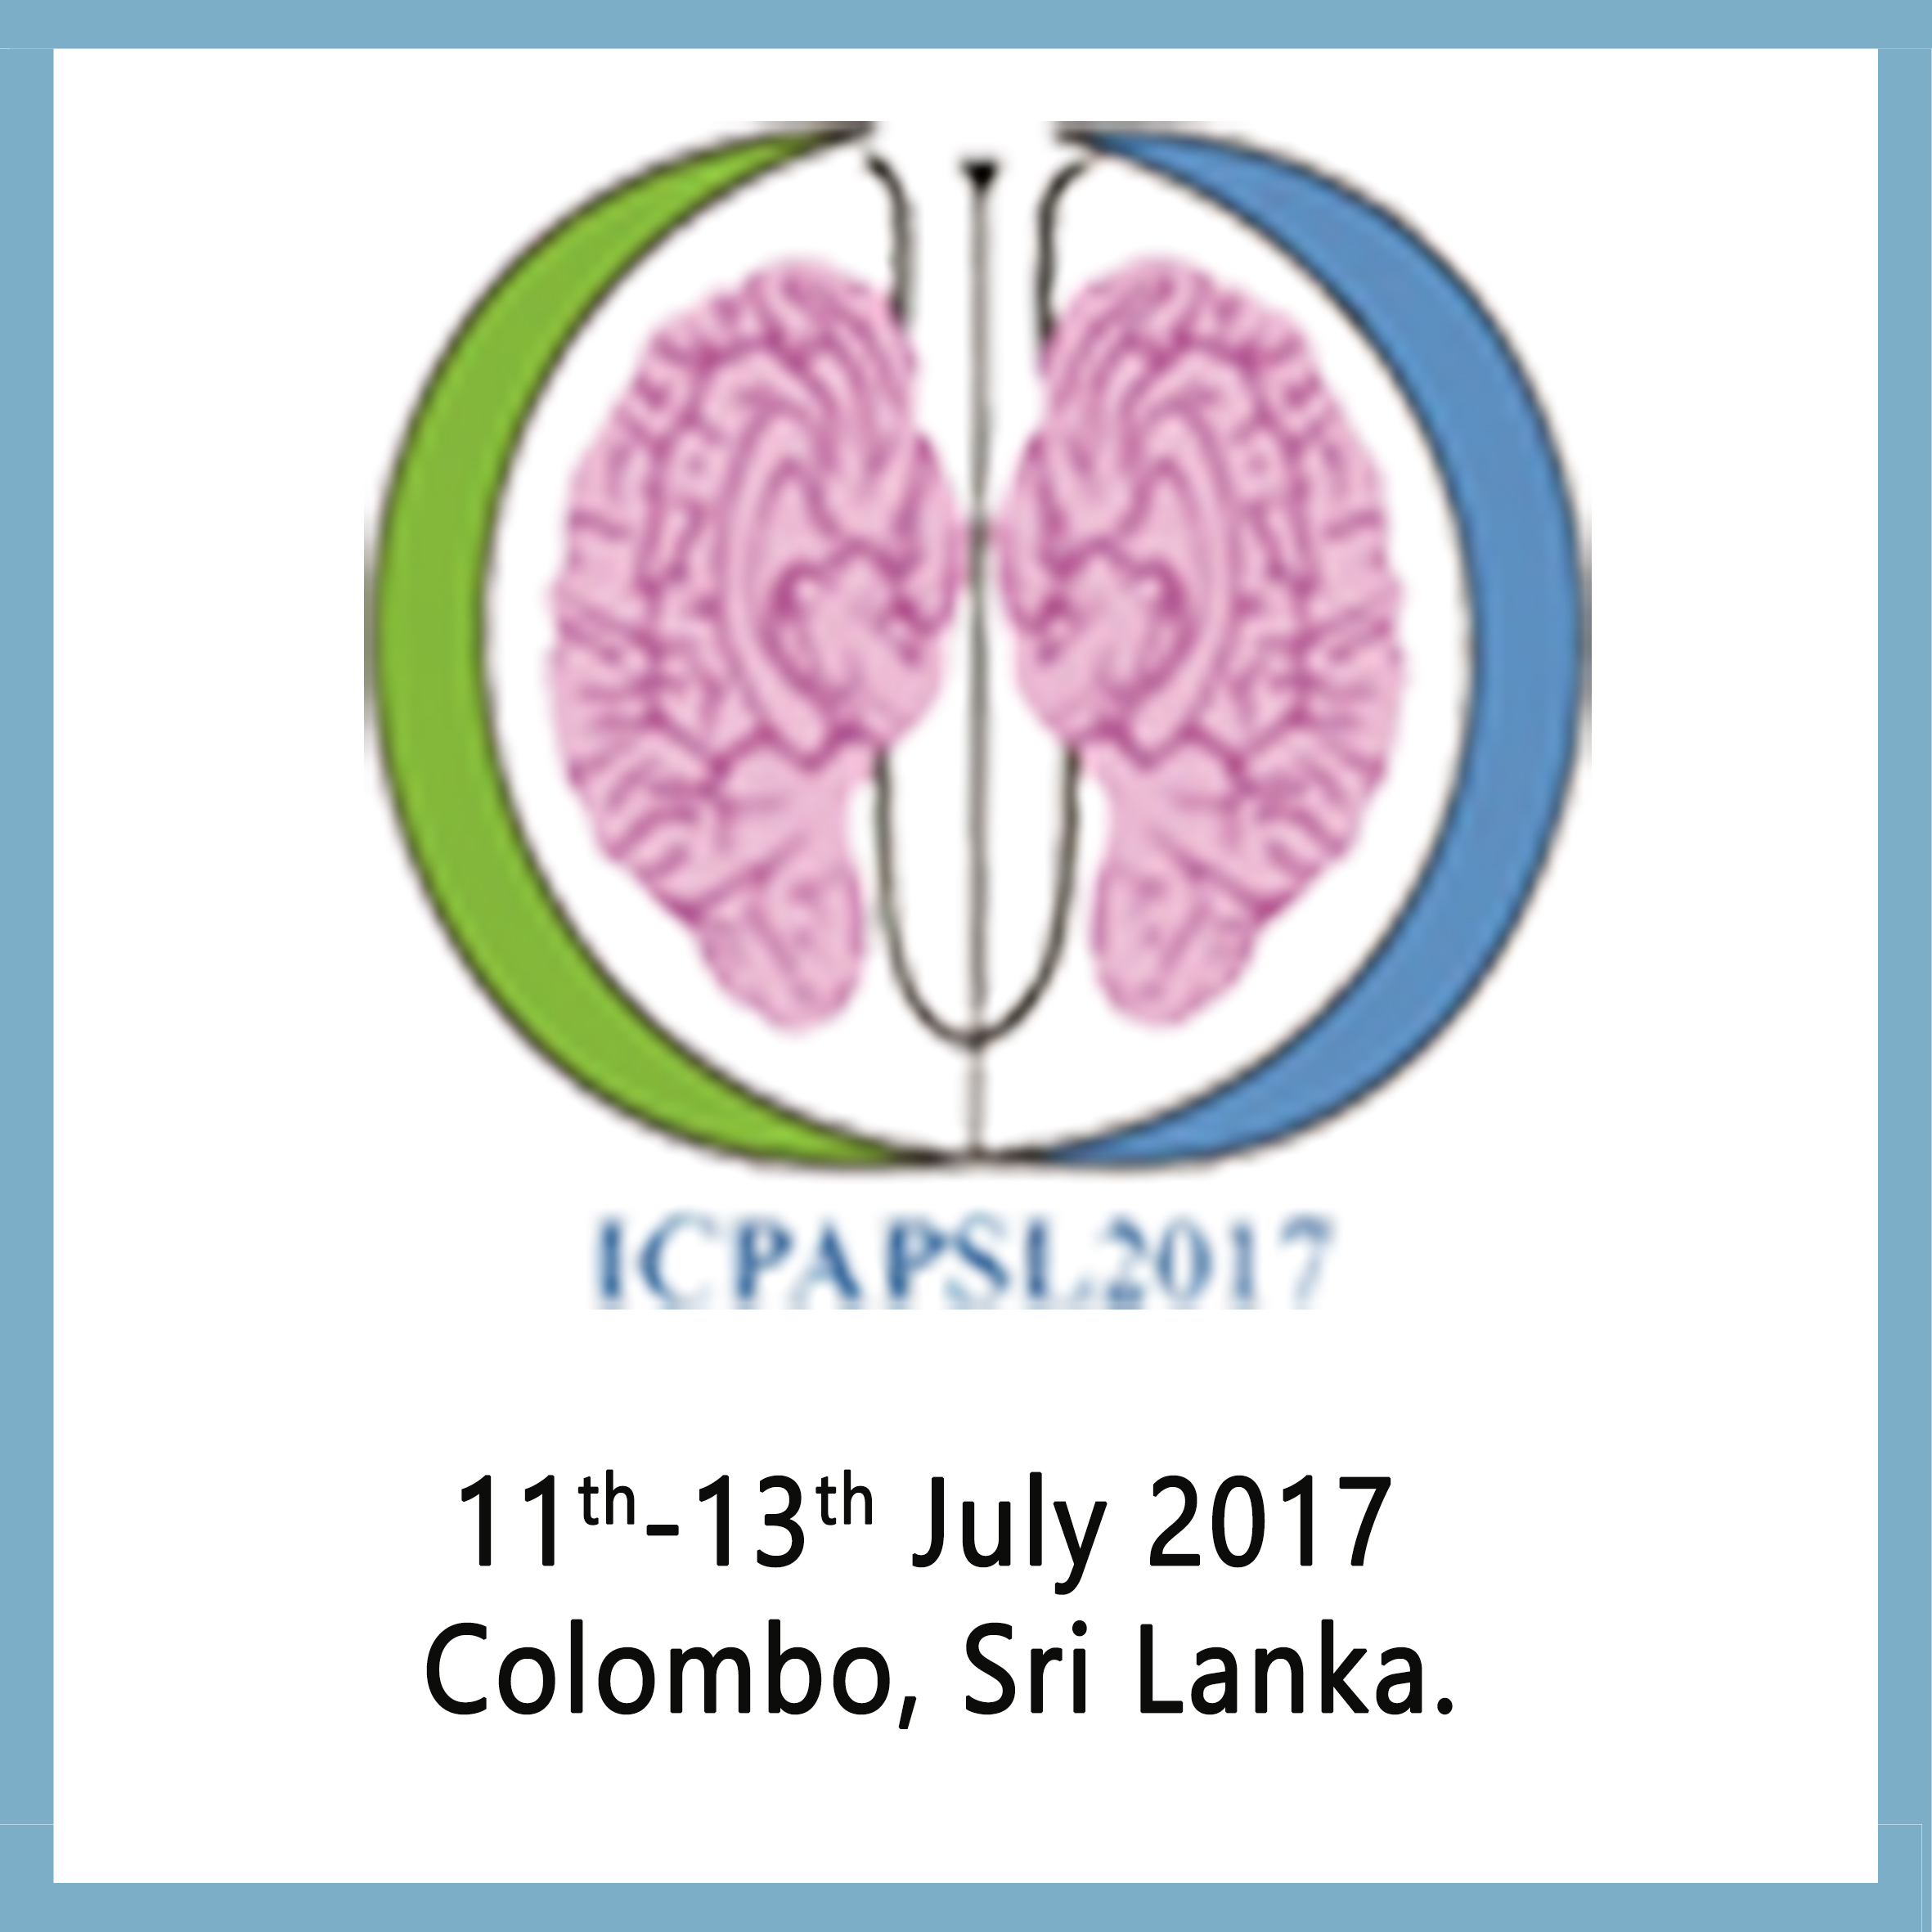 ICPAPSL 2017 will be held in Colombo Sri Lanka under the theme of  PSYCHOLOGY OF DIVERSITY TOWARDS HIGHER POTENTIALS for BETTERMENT OF HUMANITY
